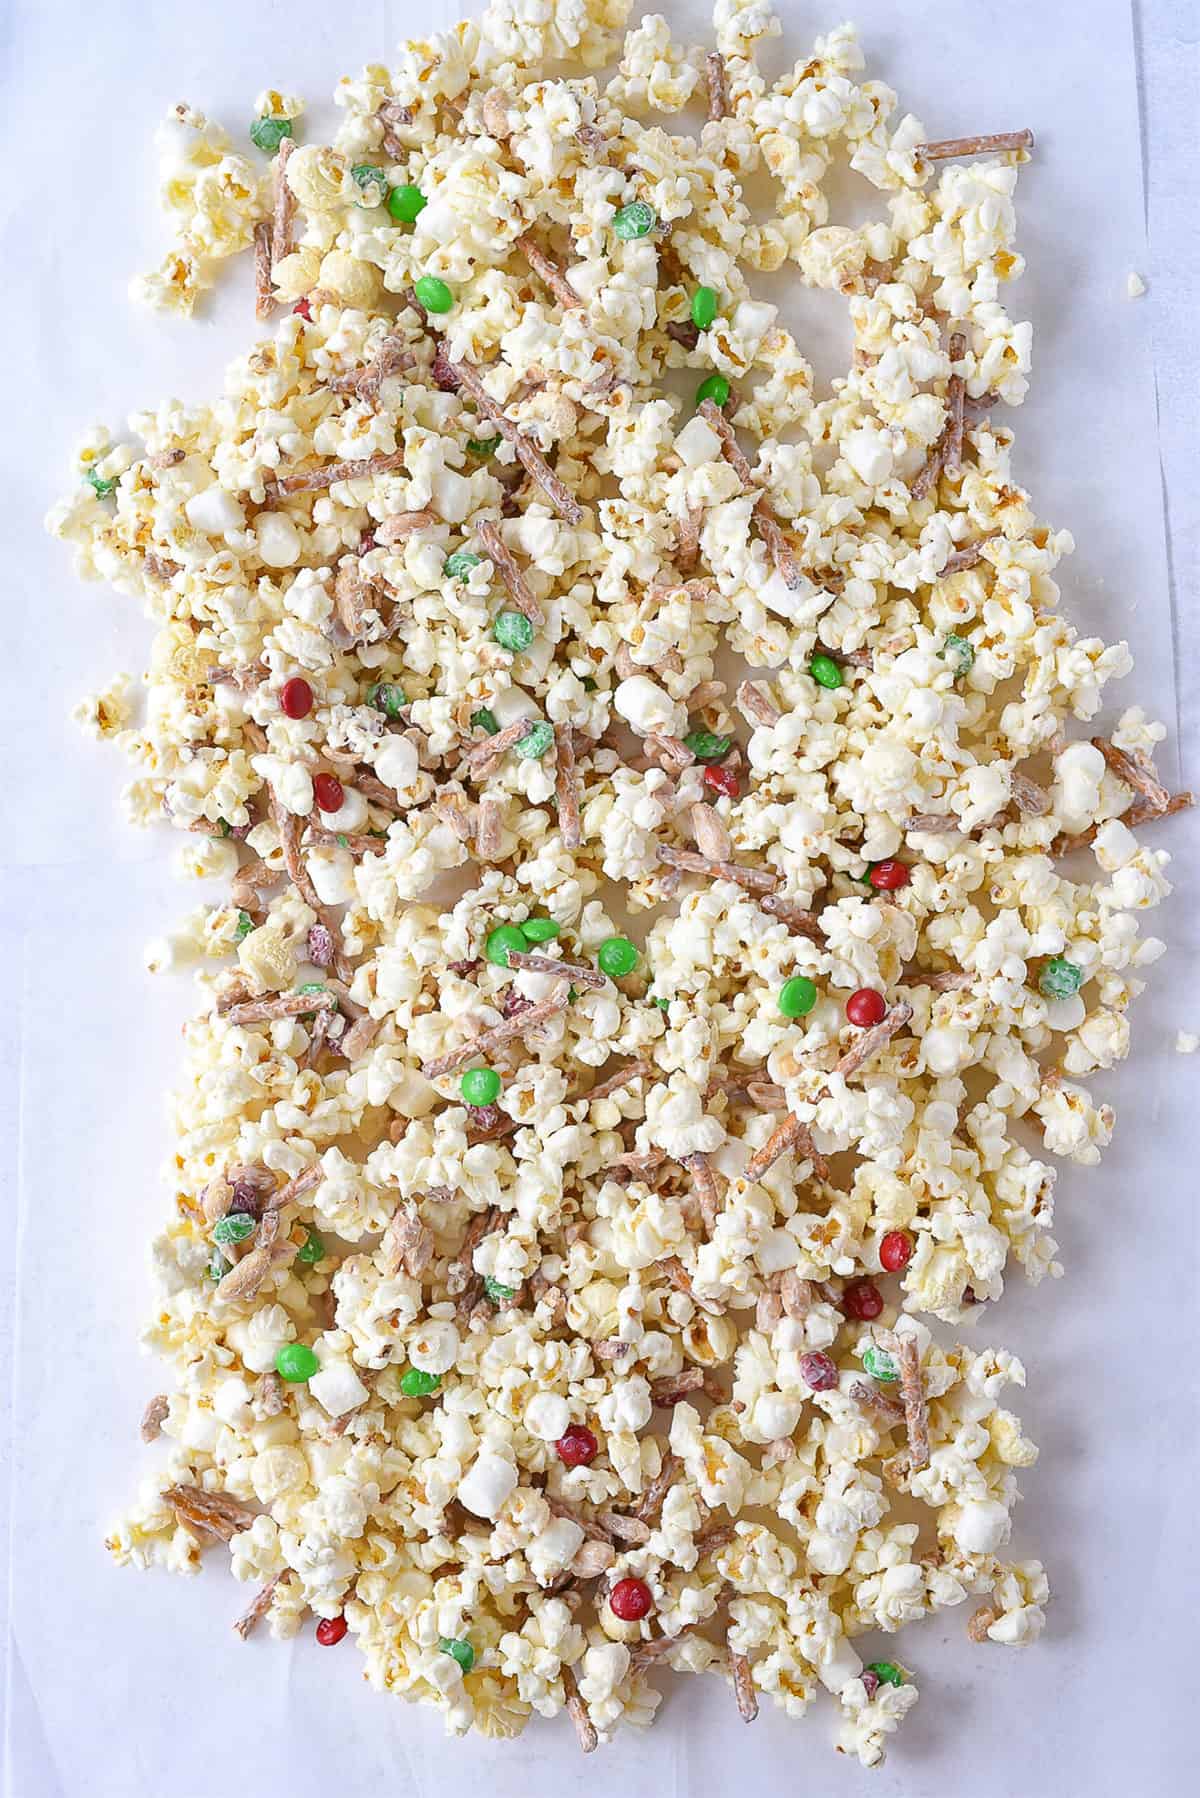 white chocolayte popcorn spread out on parchment paper